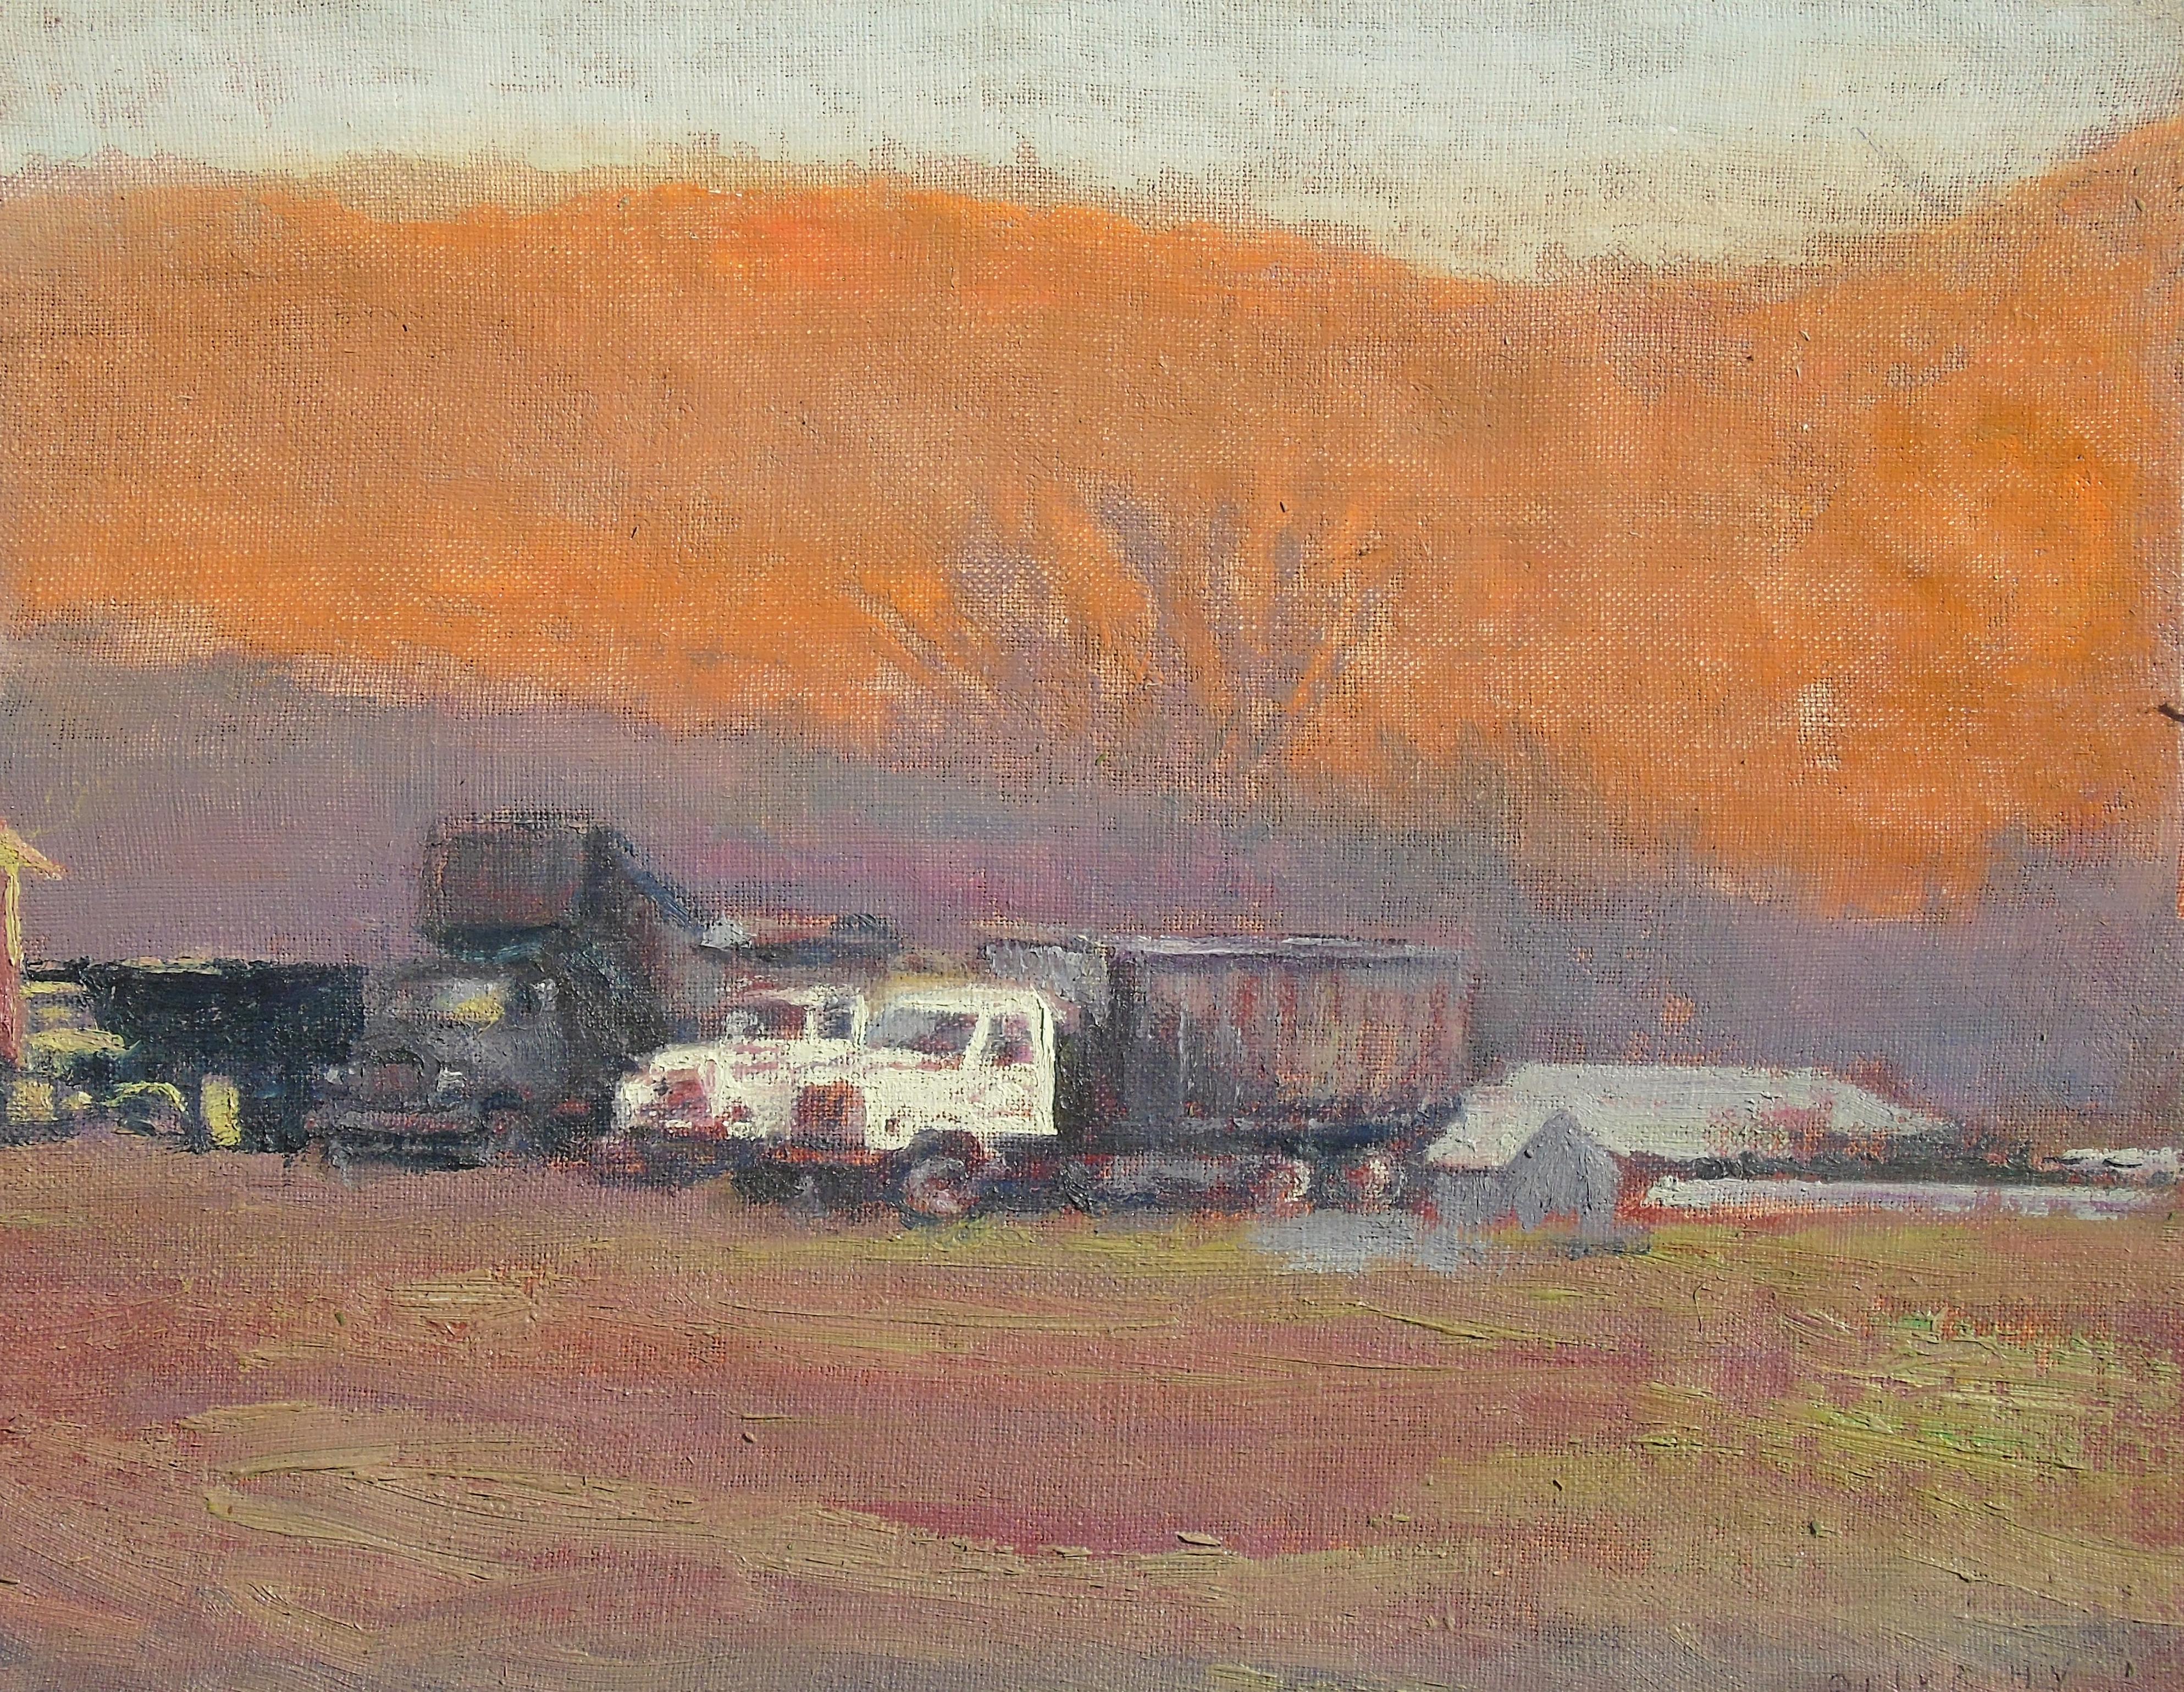 #5787 Trucks in Chambers' Valley: Impressionist En Plein Air Landscape at Sunset - Painting by Harry Orlyk